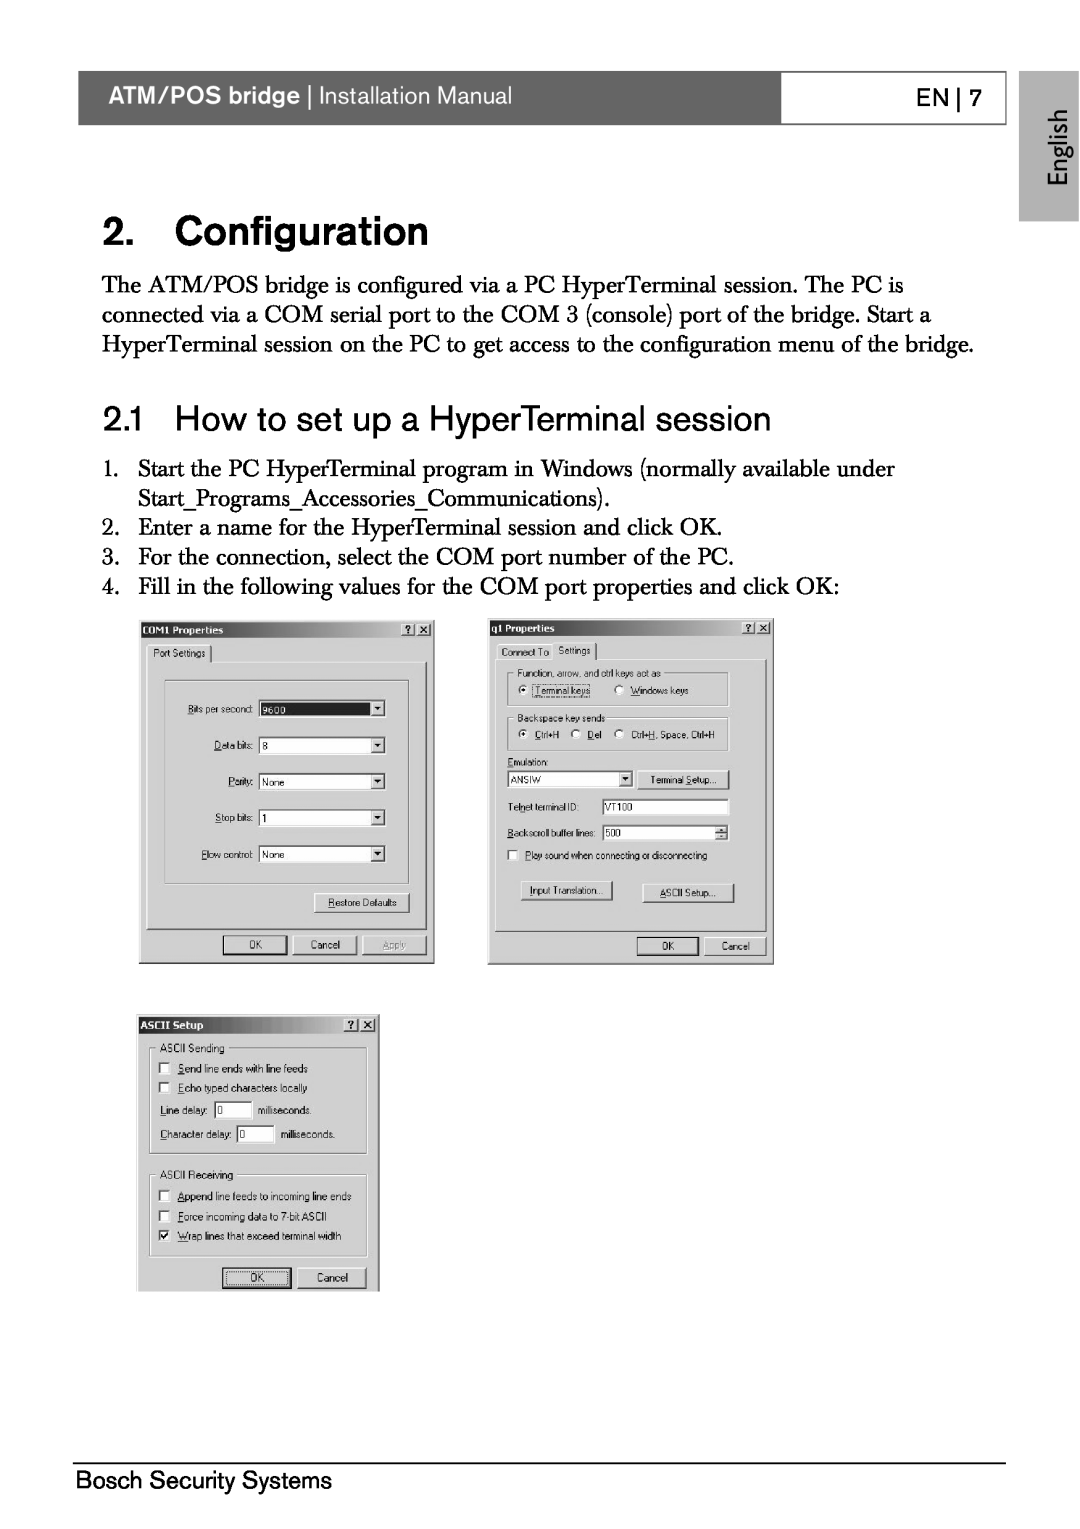 Bosch Appliances ATM/POS Bridge Configuration, How to set up a HyperTerminal session, English, Bosch Security Systems 